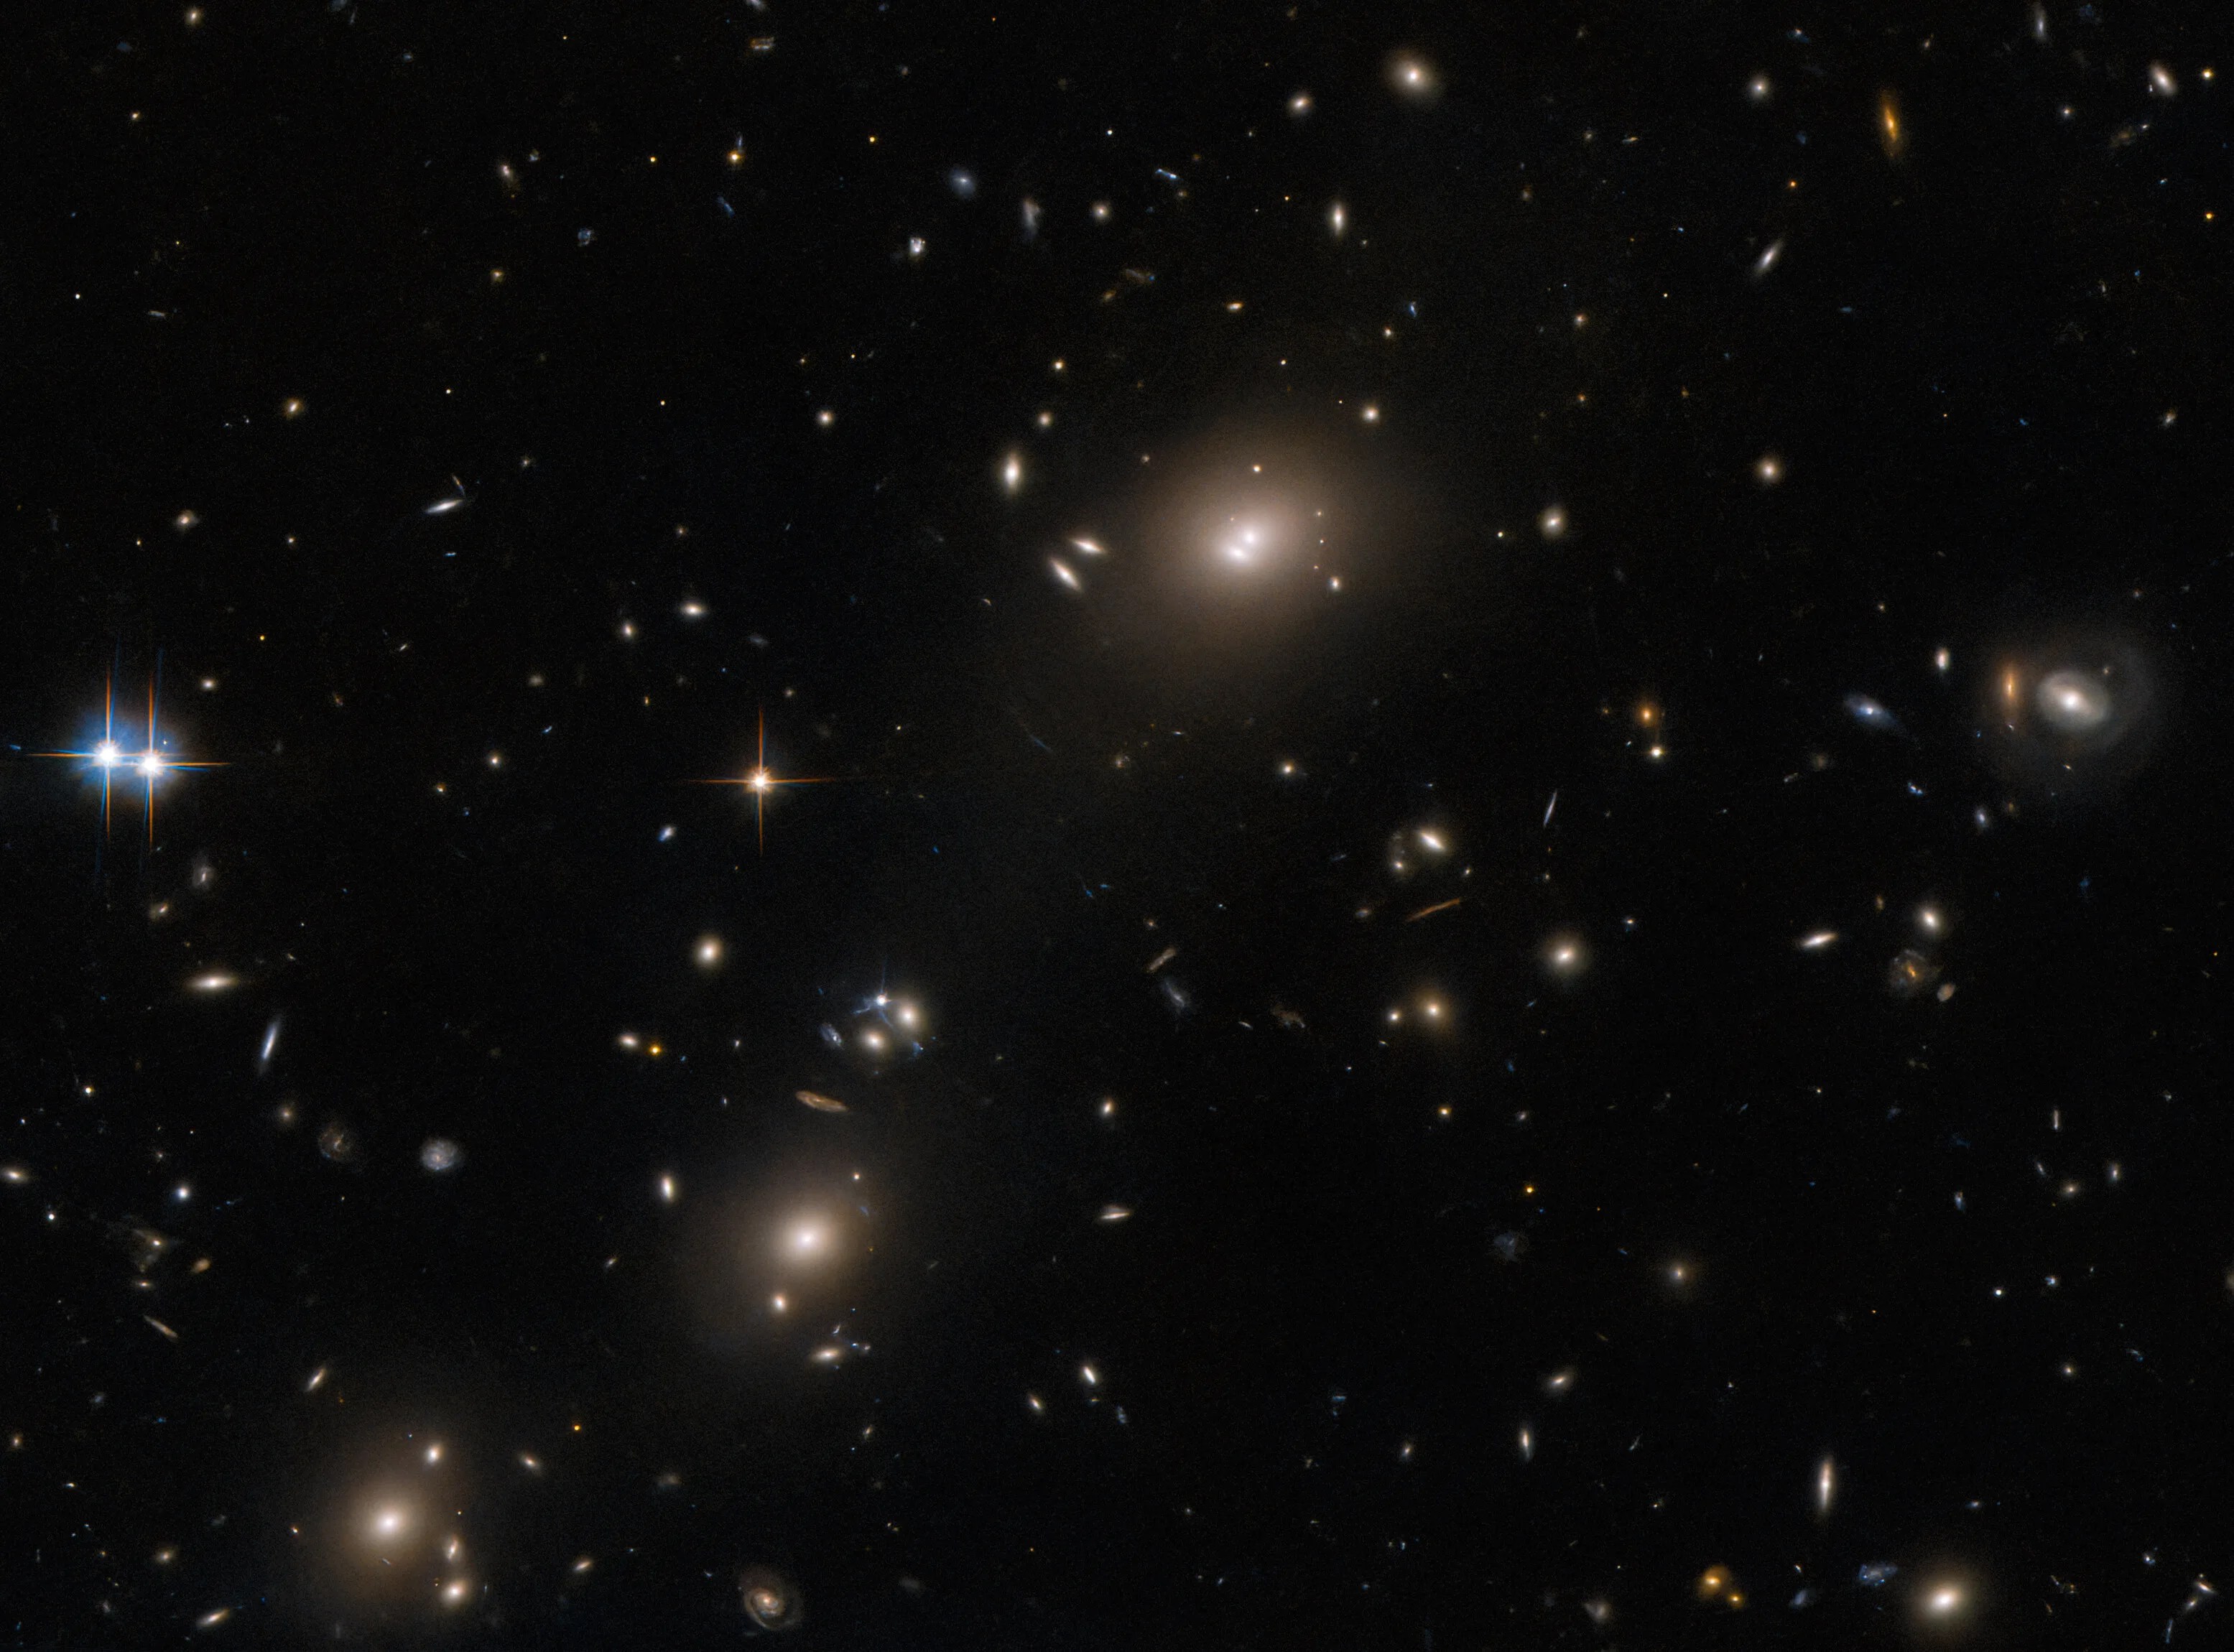 A collection of oval-shaped, elliptical galaxies. The largest has two neighboring bright spots in the core. It and two others look like galaxy clusters, with surrounding smaller galaxies. On the left edge of the image are two bright stars with four long spikes, and on the right edge is a small ring-shaped galaxy. Smaller stars and galaxies are spread evenly across the dark background.